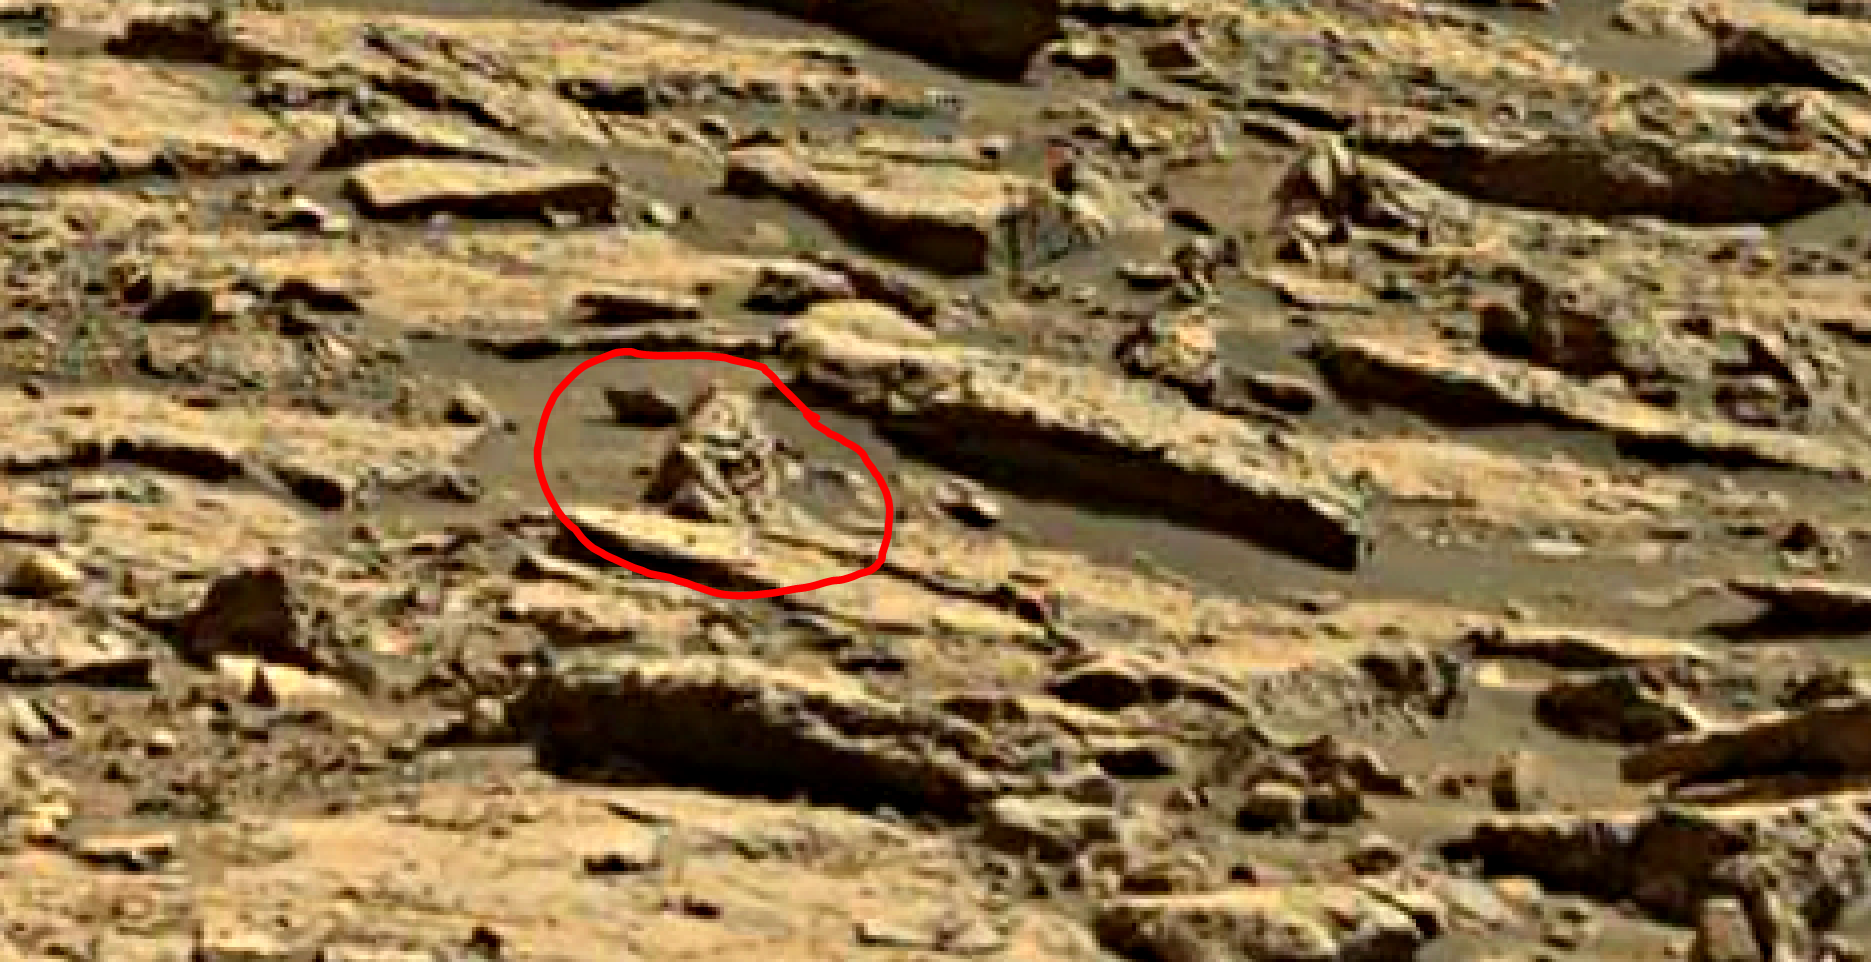 mars sol 1435 anomaly artifacts 2a was life on mars